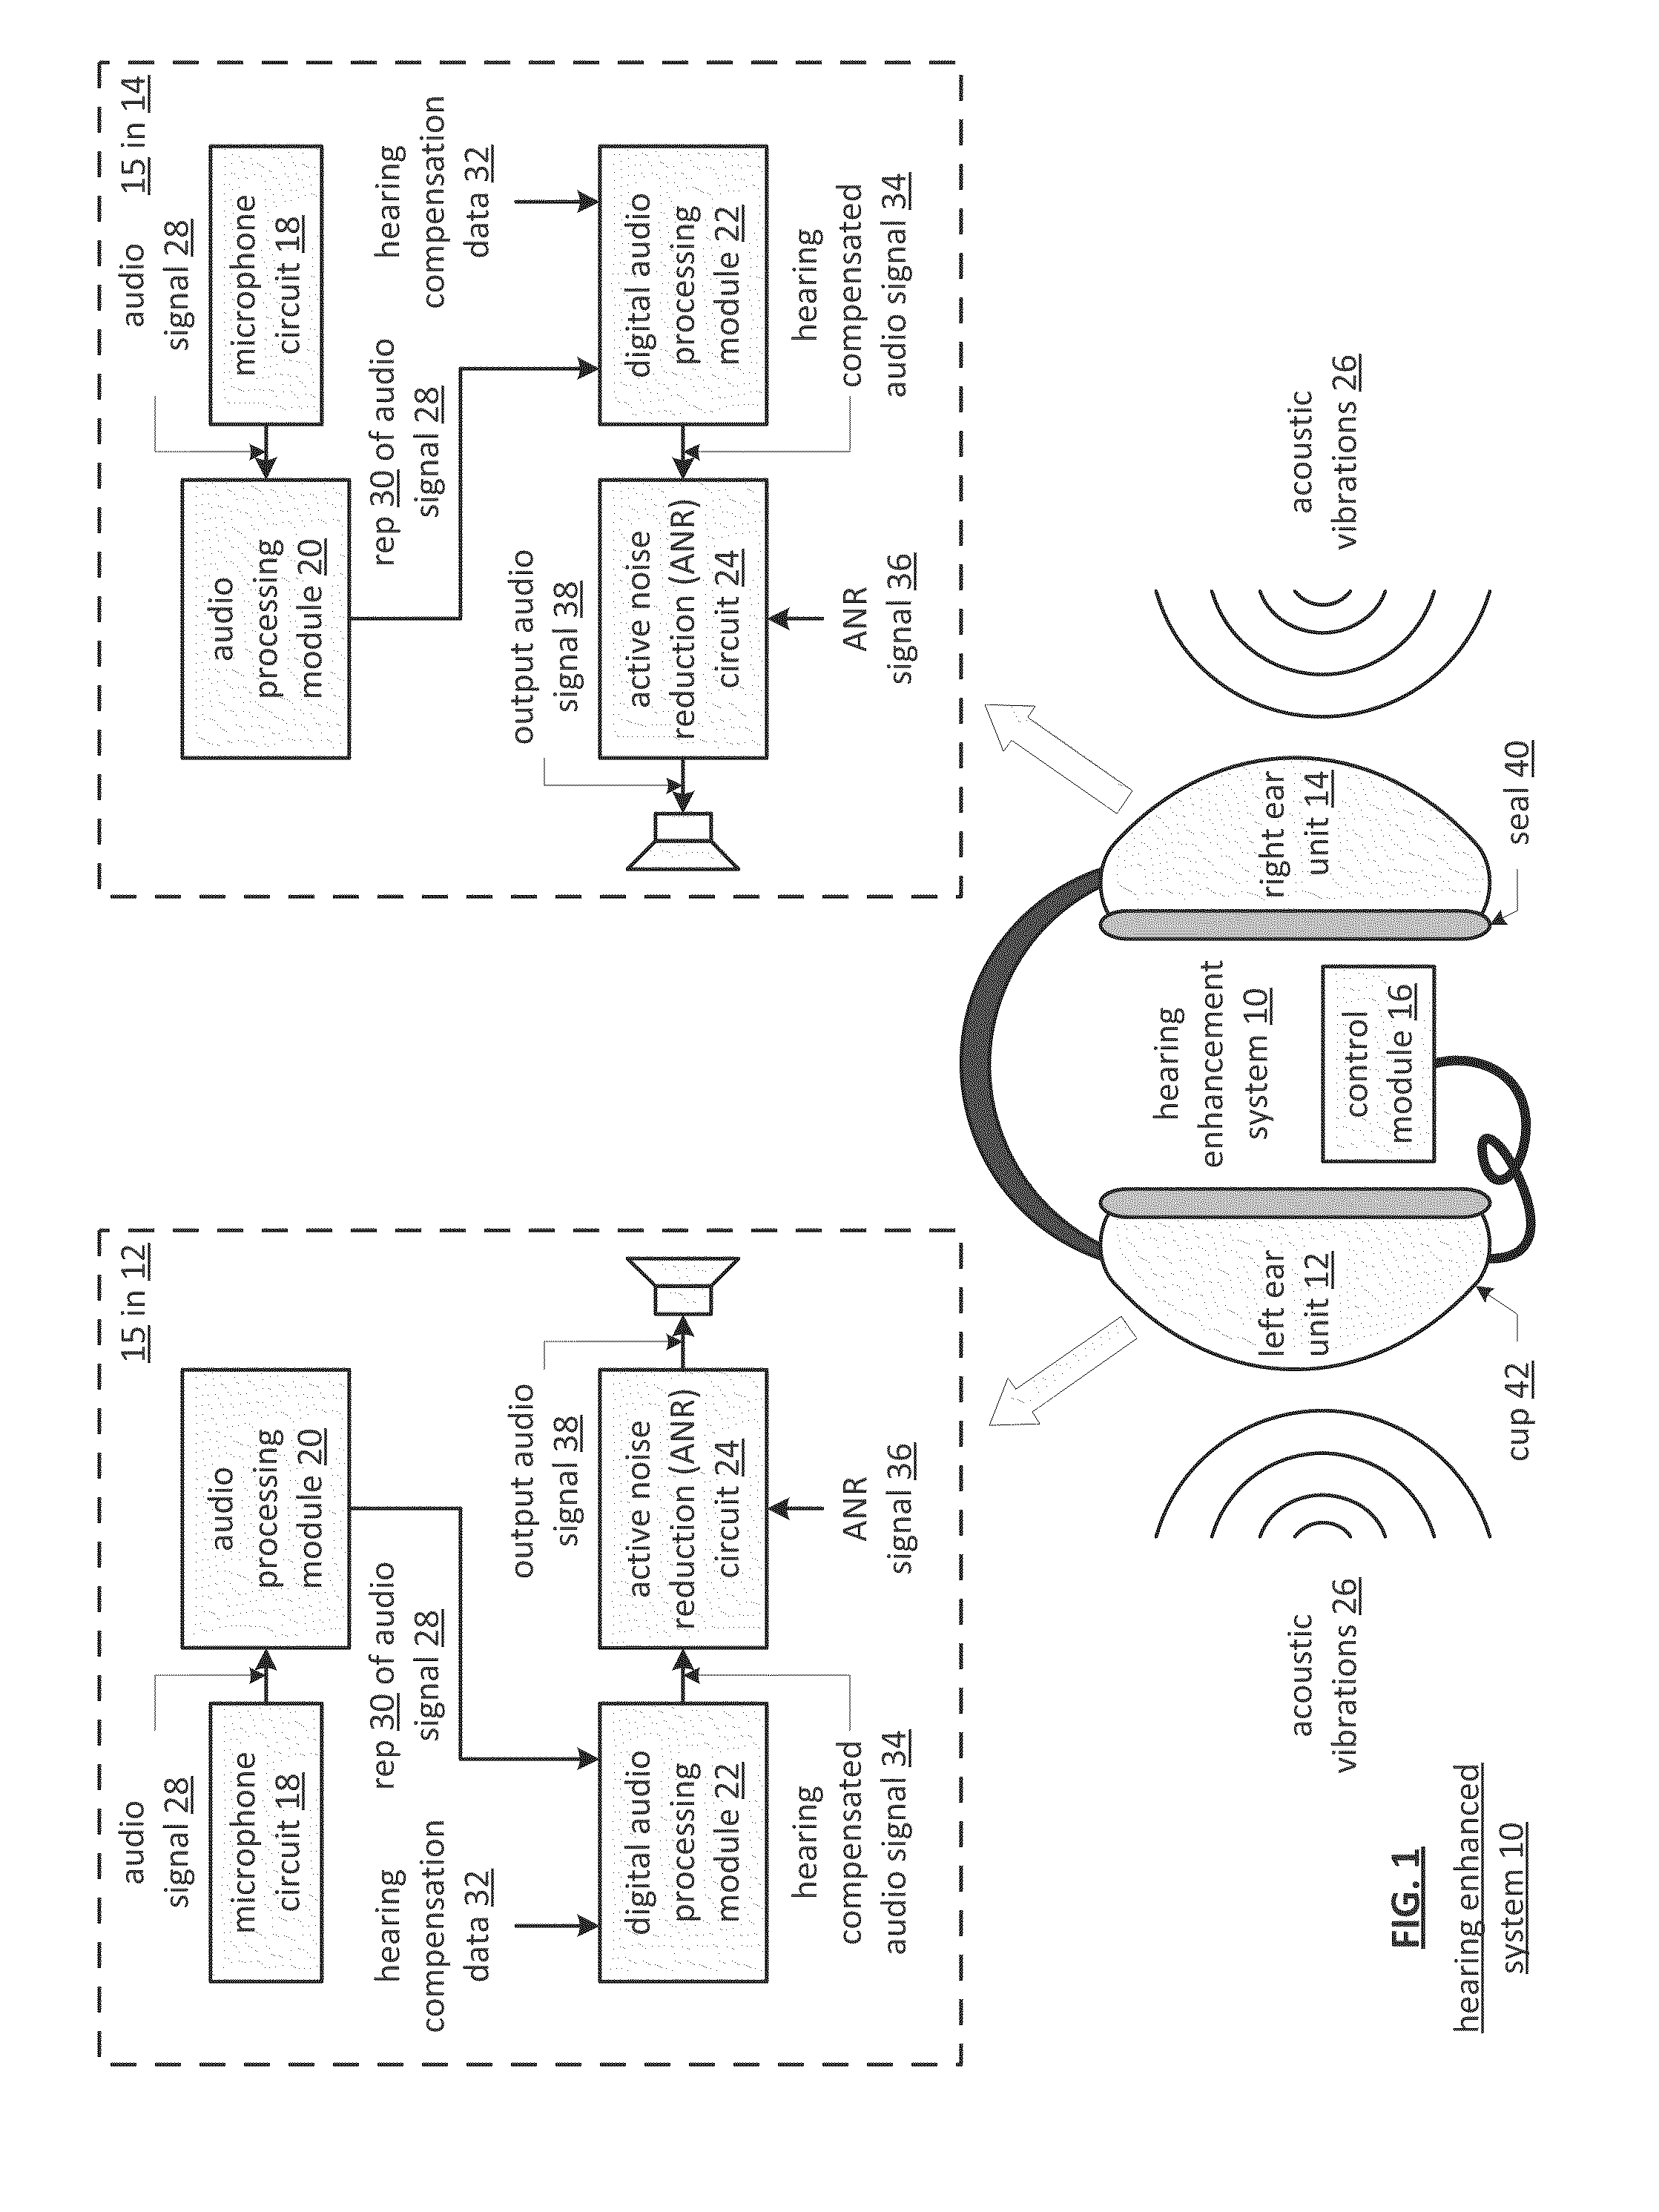 Hearing enhancement system and components thereof